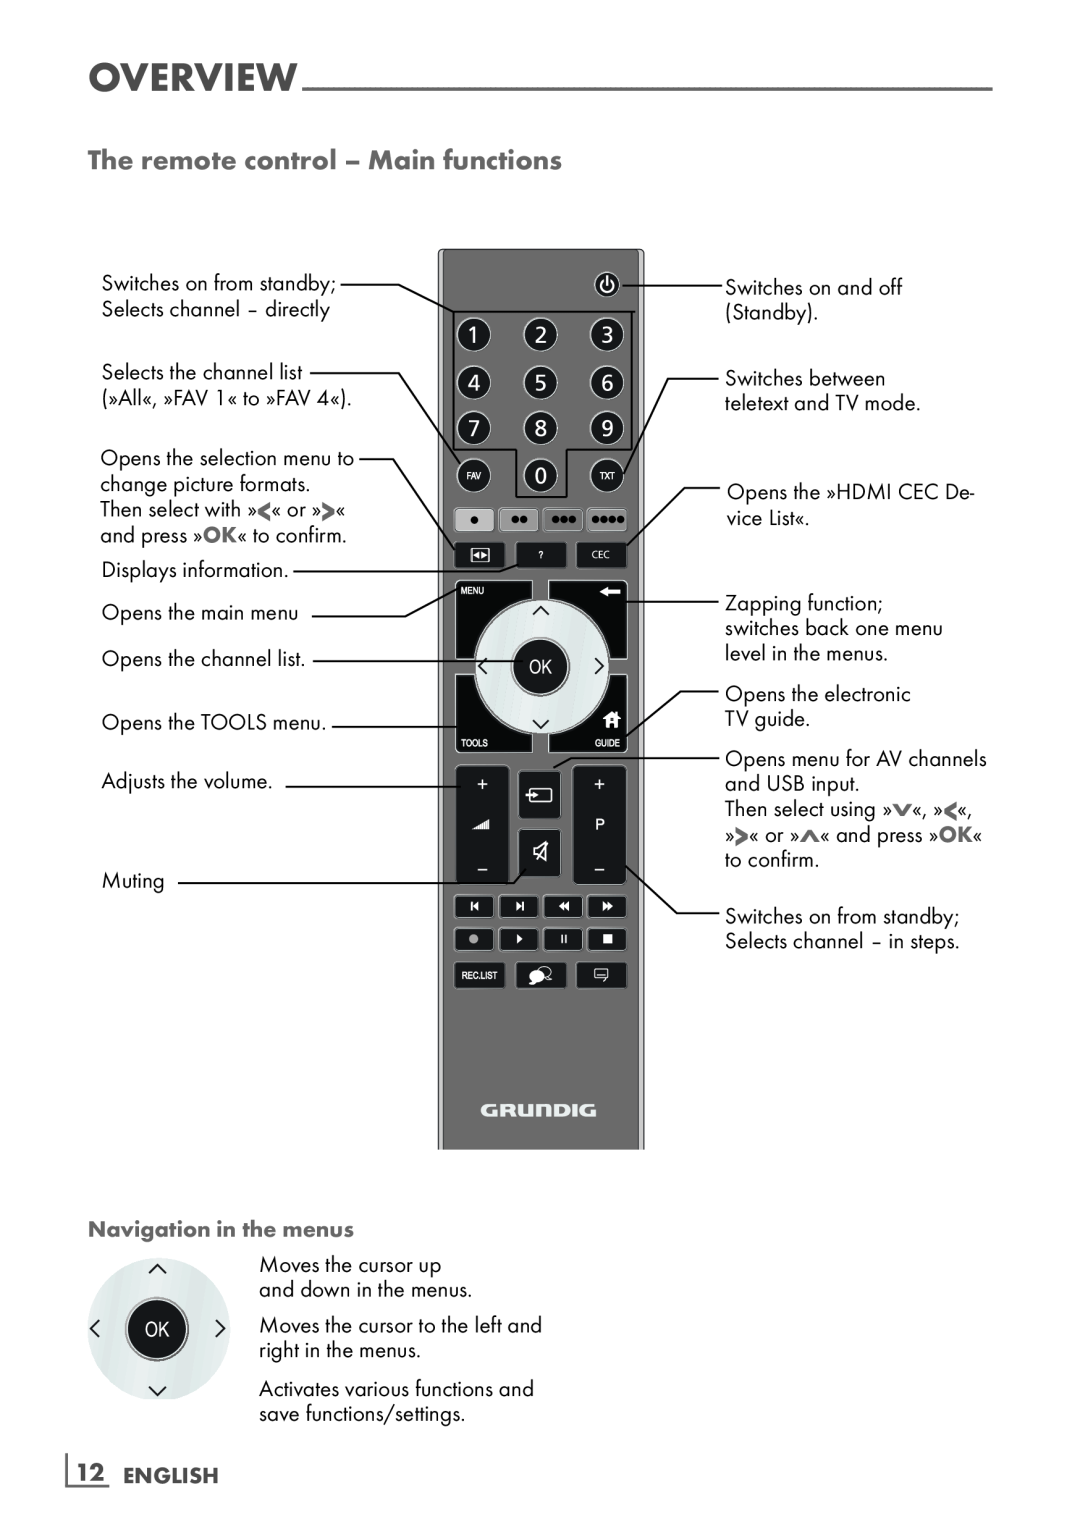 Grundig 32 VLD 4201 BF manual The remote control - Main functions, ­12 ENGLISH, Navigation in the menus 